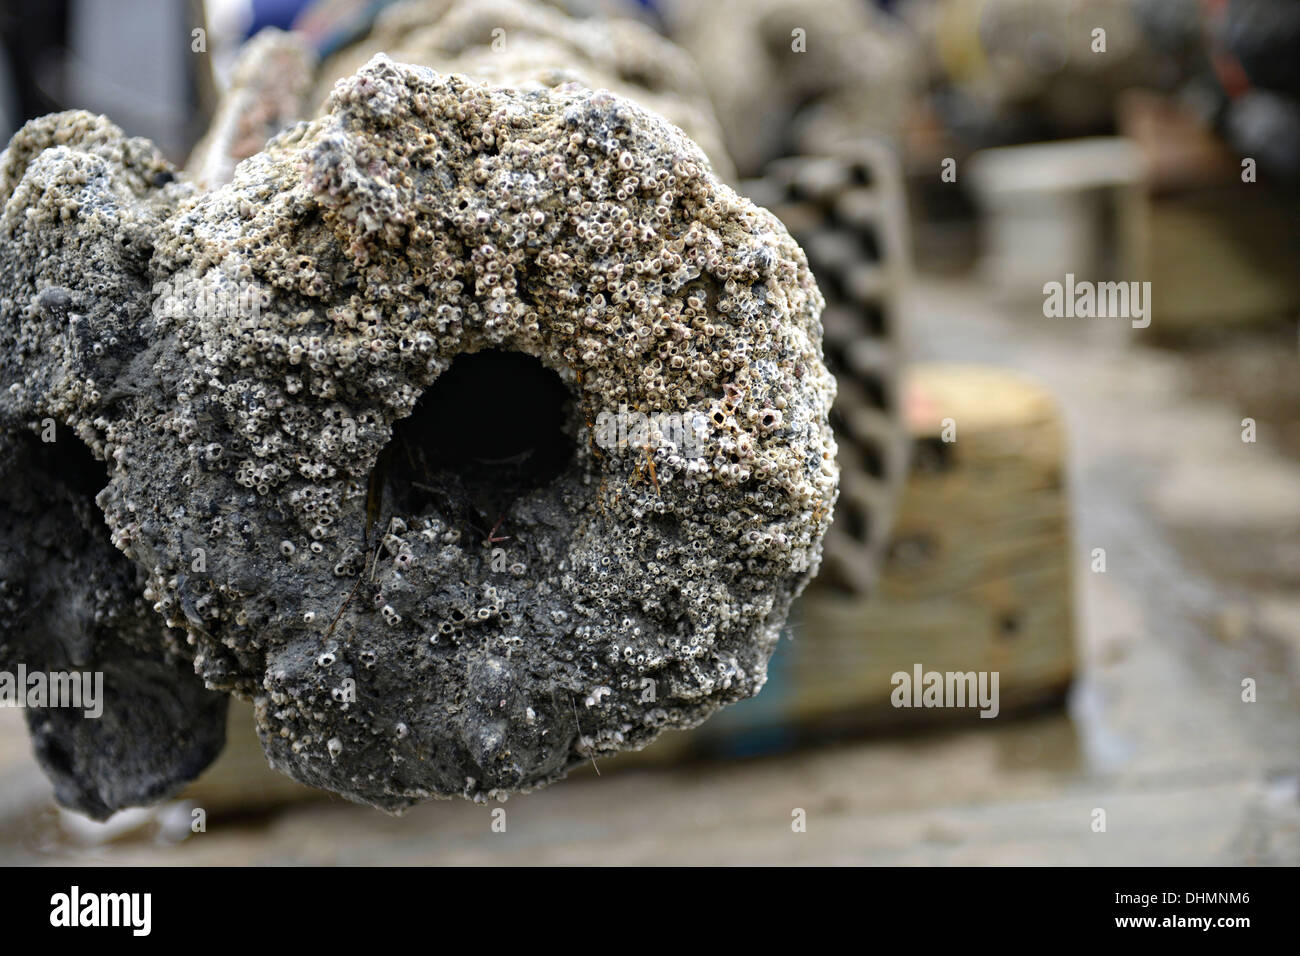 A close up of a barnacle covered cannons recovered from the wreck of the Queen Anne's Revenge October 28, 2013 in Beaufort Inlet, NC. The Queen Anne's Revenge was the ship of the pirate Edward Teach, better known as Blackbeard. Stock Photo